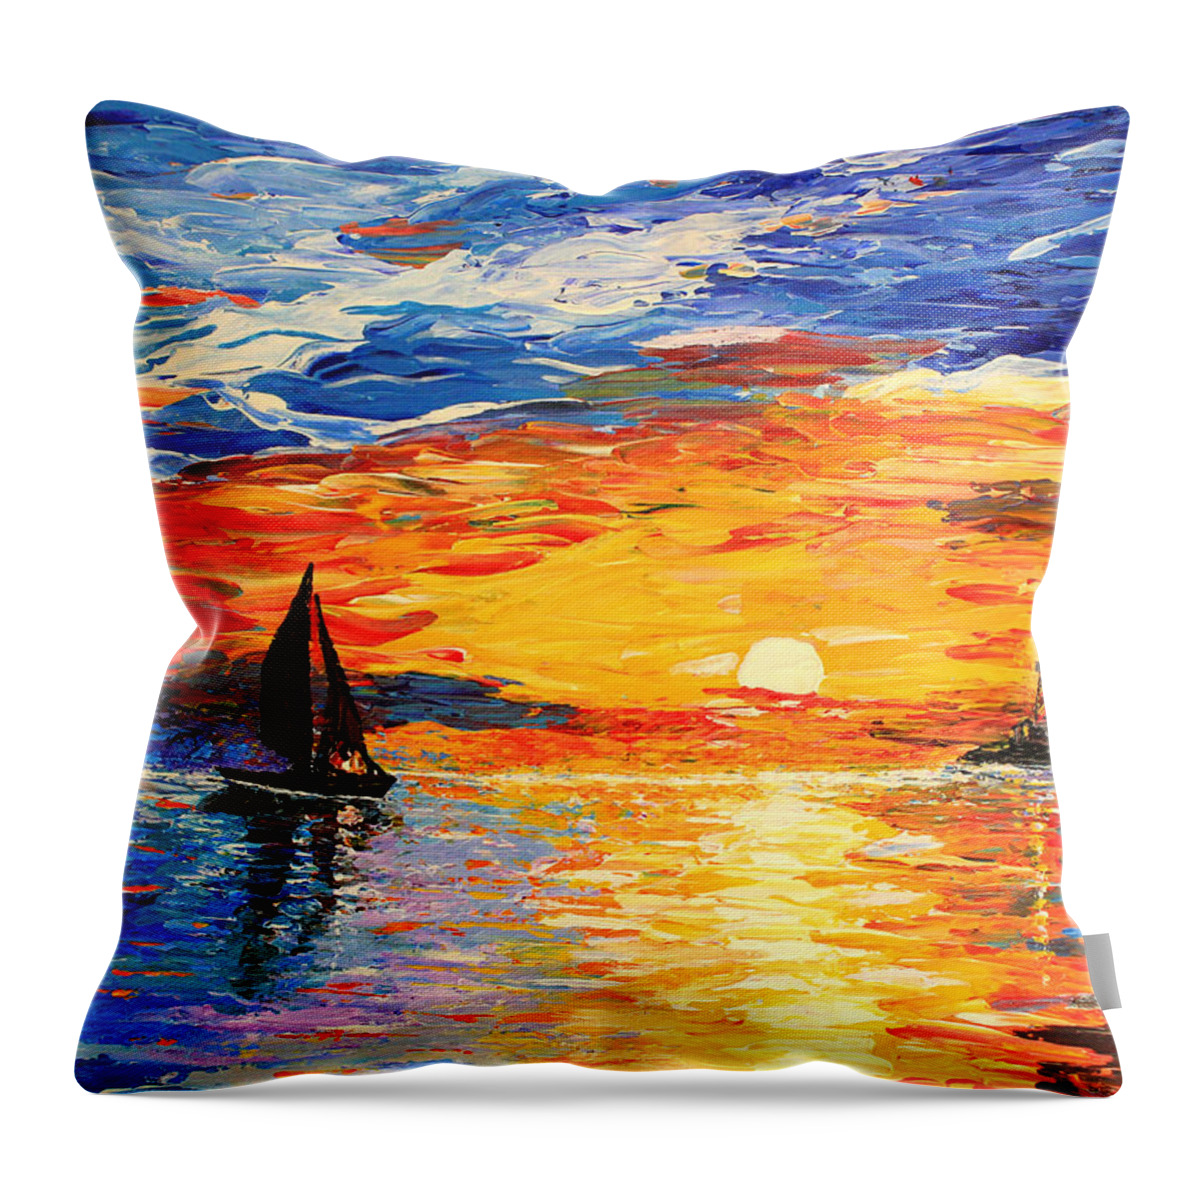 Seascape Throw Pillow featuring the painting Romantic Sea Sunset by Georgeta Blanaru